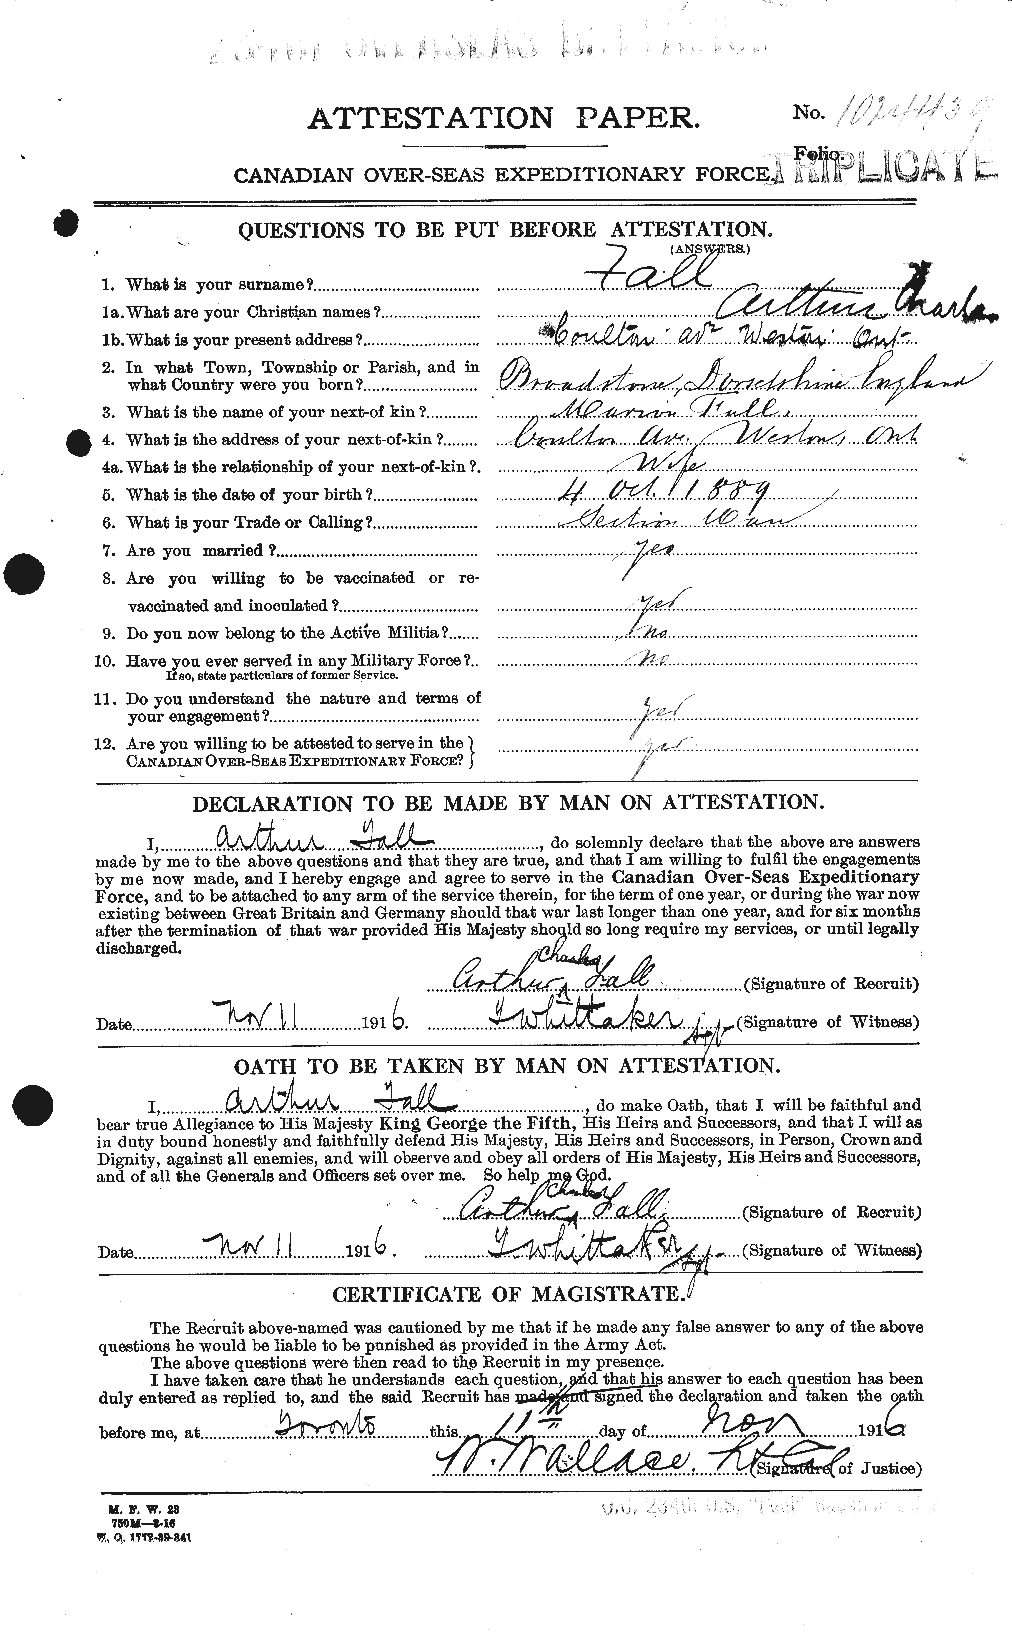 Personnel Records of the First World War - CEF 317081a